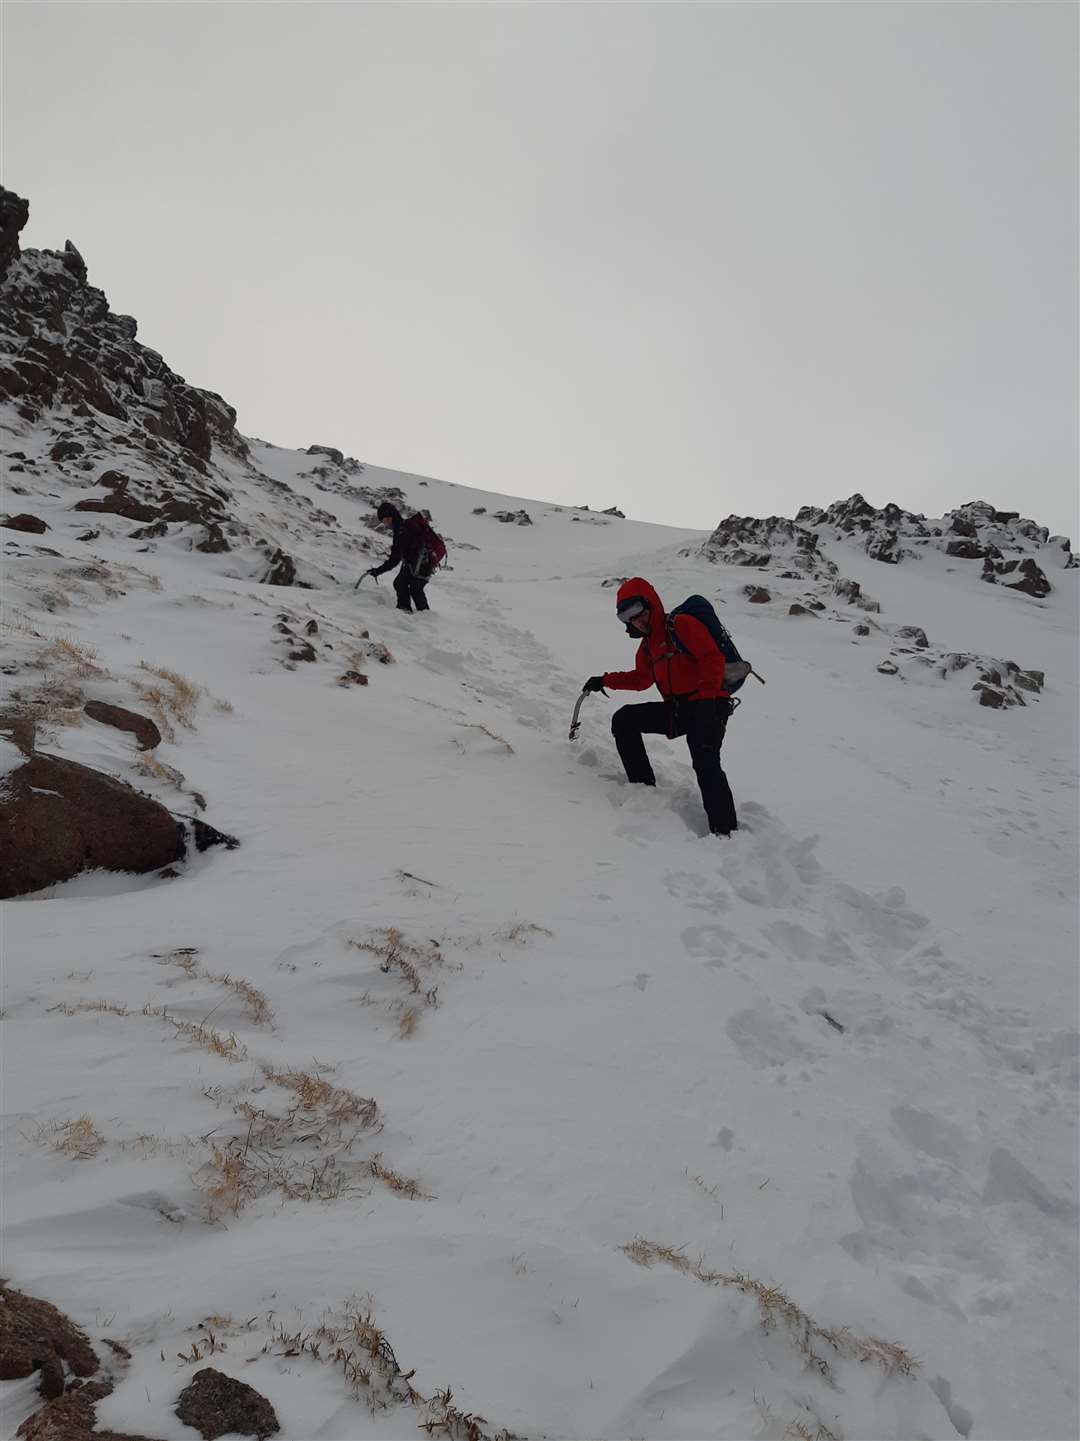 Using equipment including ice axes is all part of a winter's day in the hills.